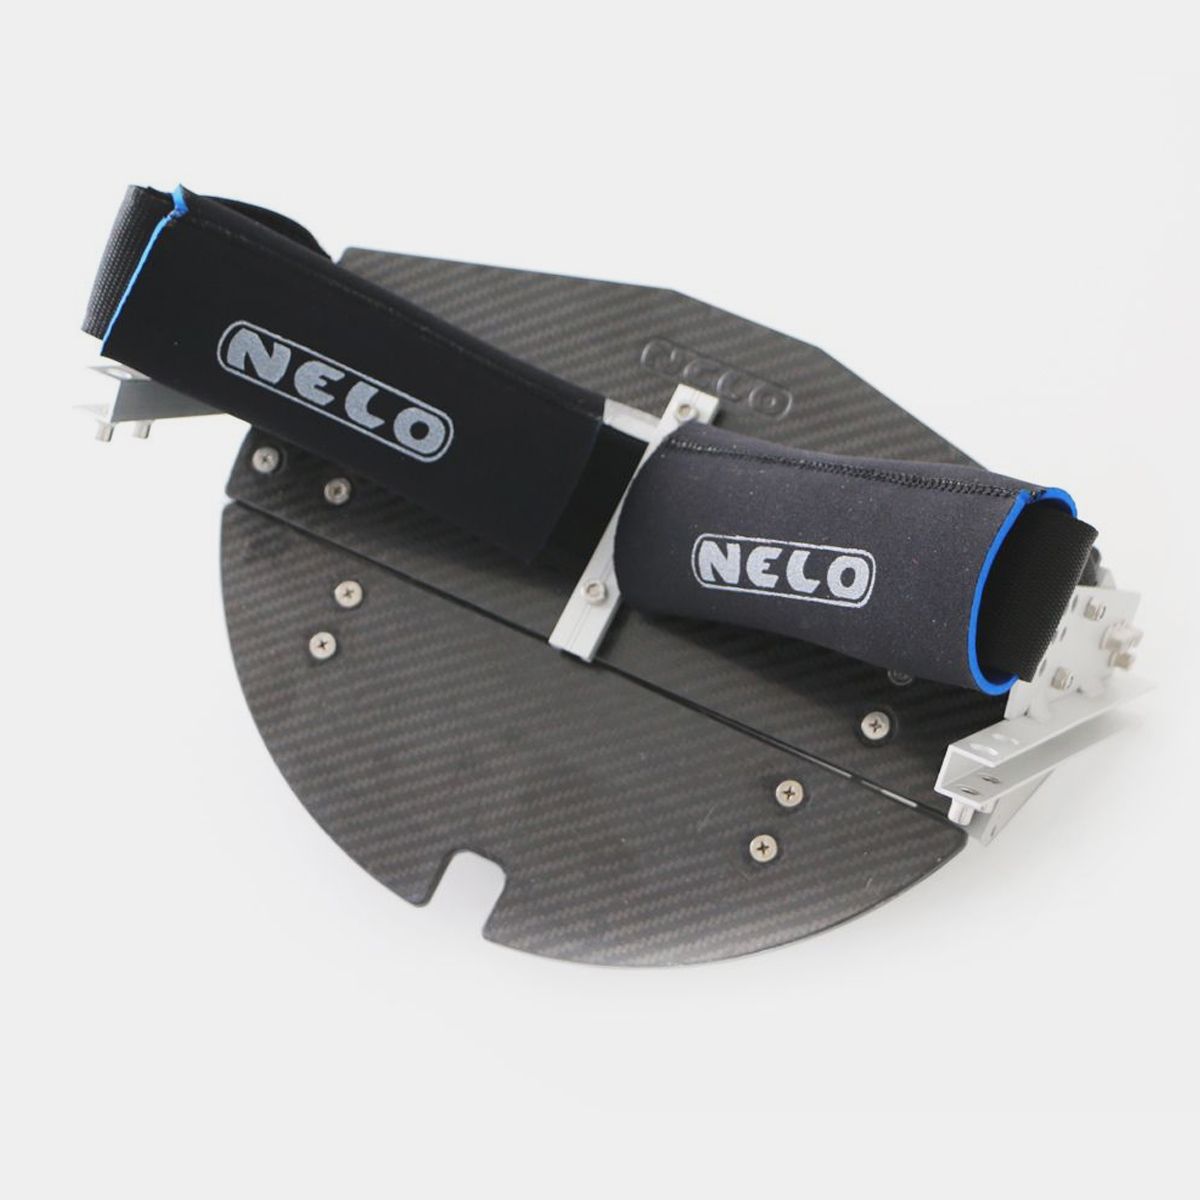 Nelo Foot Rest K2 view from front